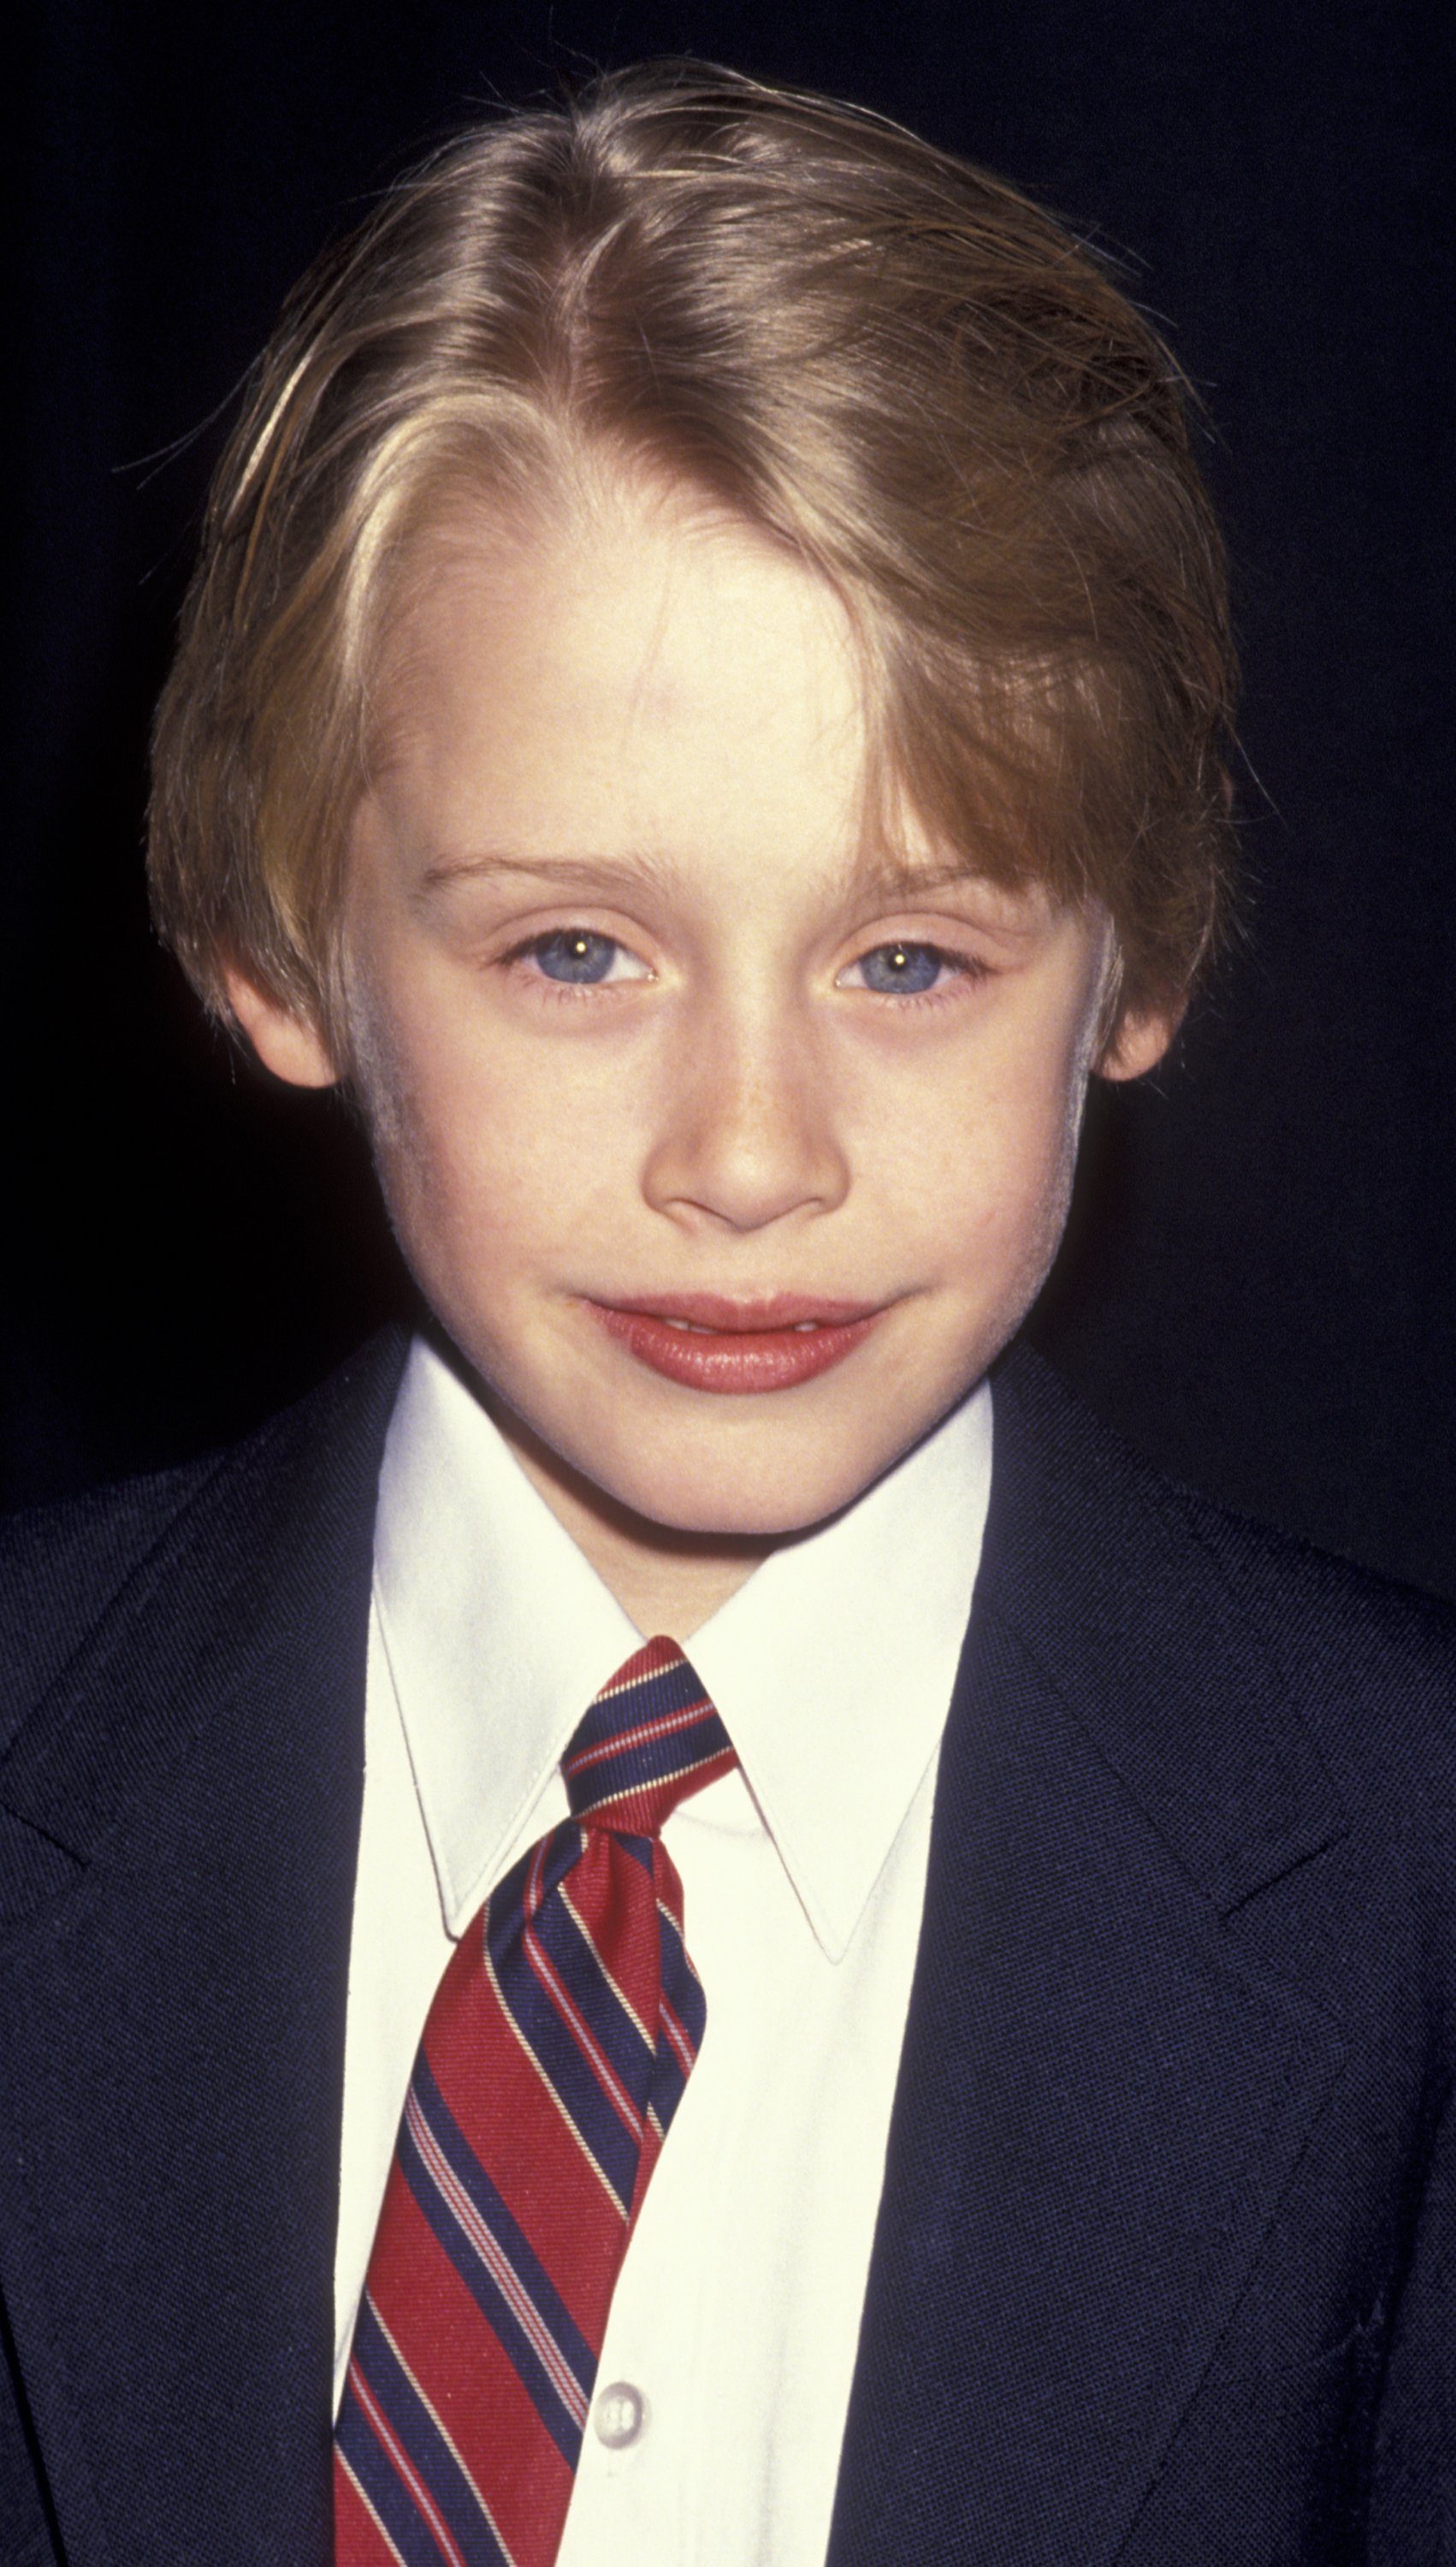 Macaulay Culkin attends 62nd Annual National Board of Review Awards on March 4, 1991 at the Equitable Center in New York City. | Source: Getty Images